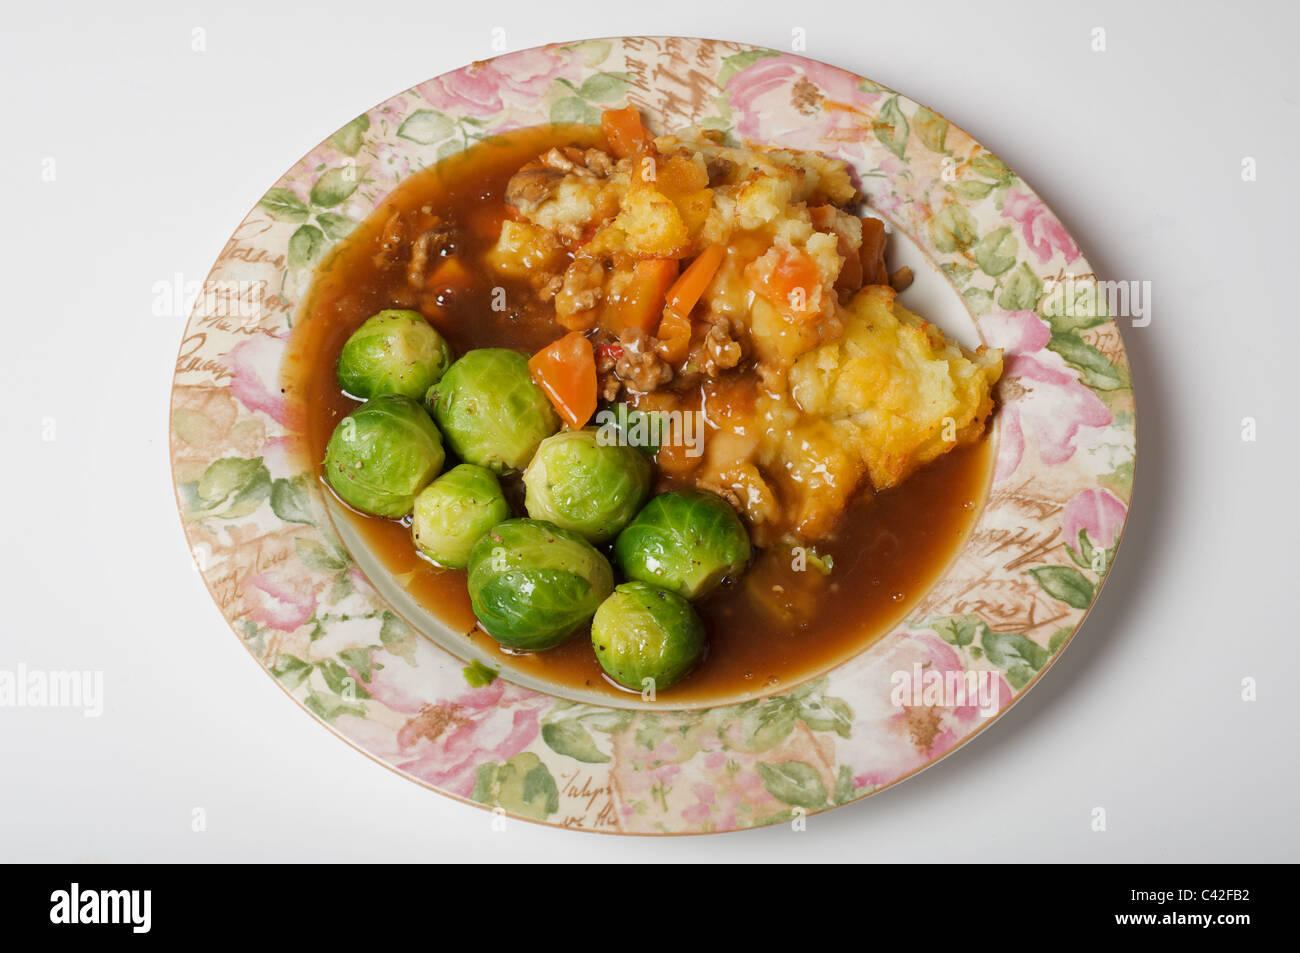 Sheperds pie with Brussel sprouts Stock Photo